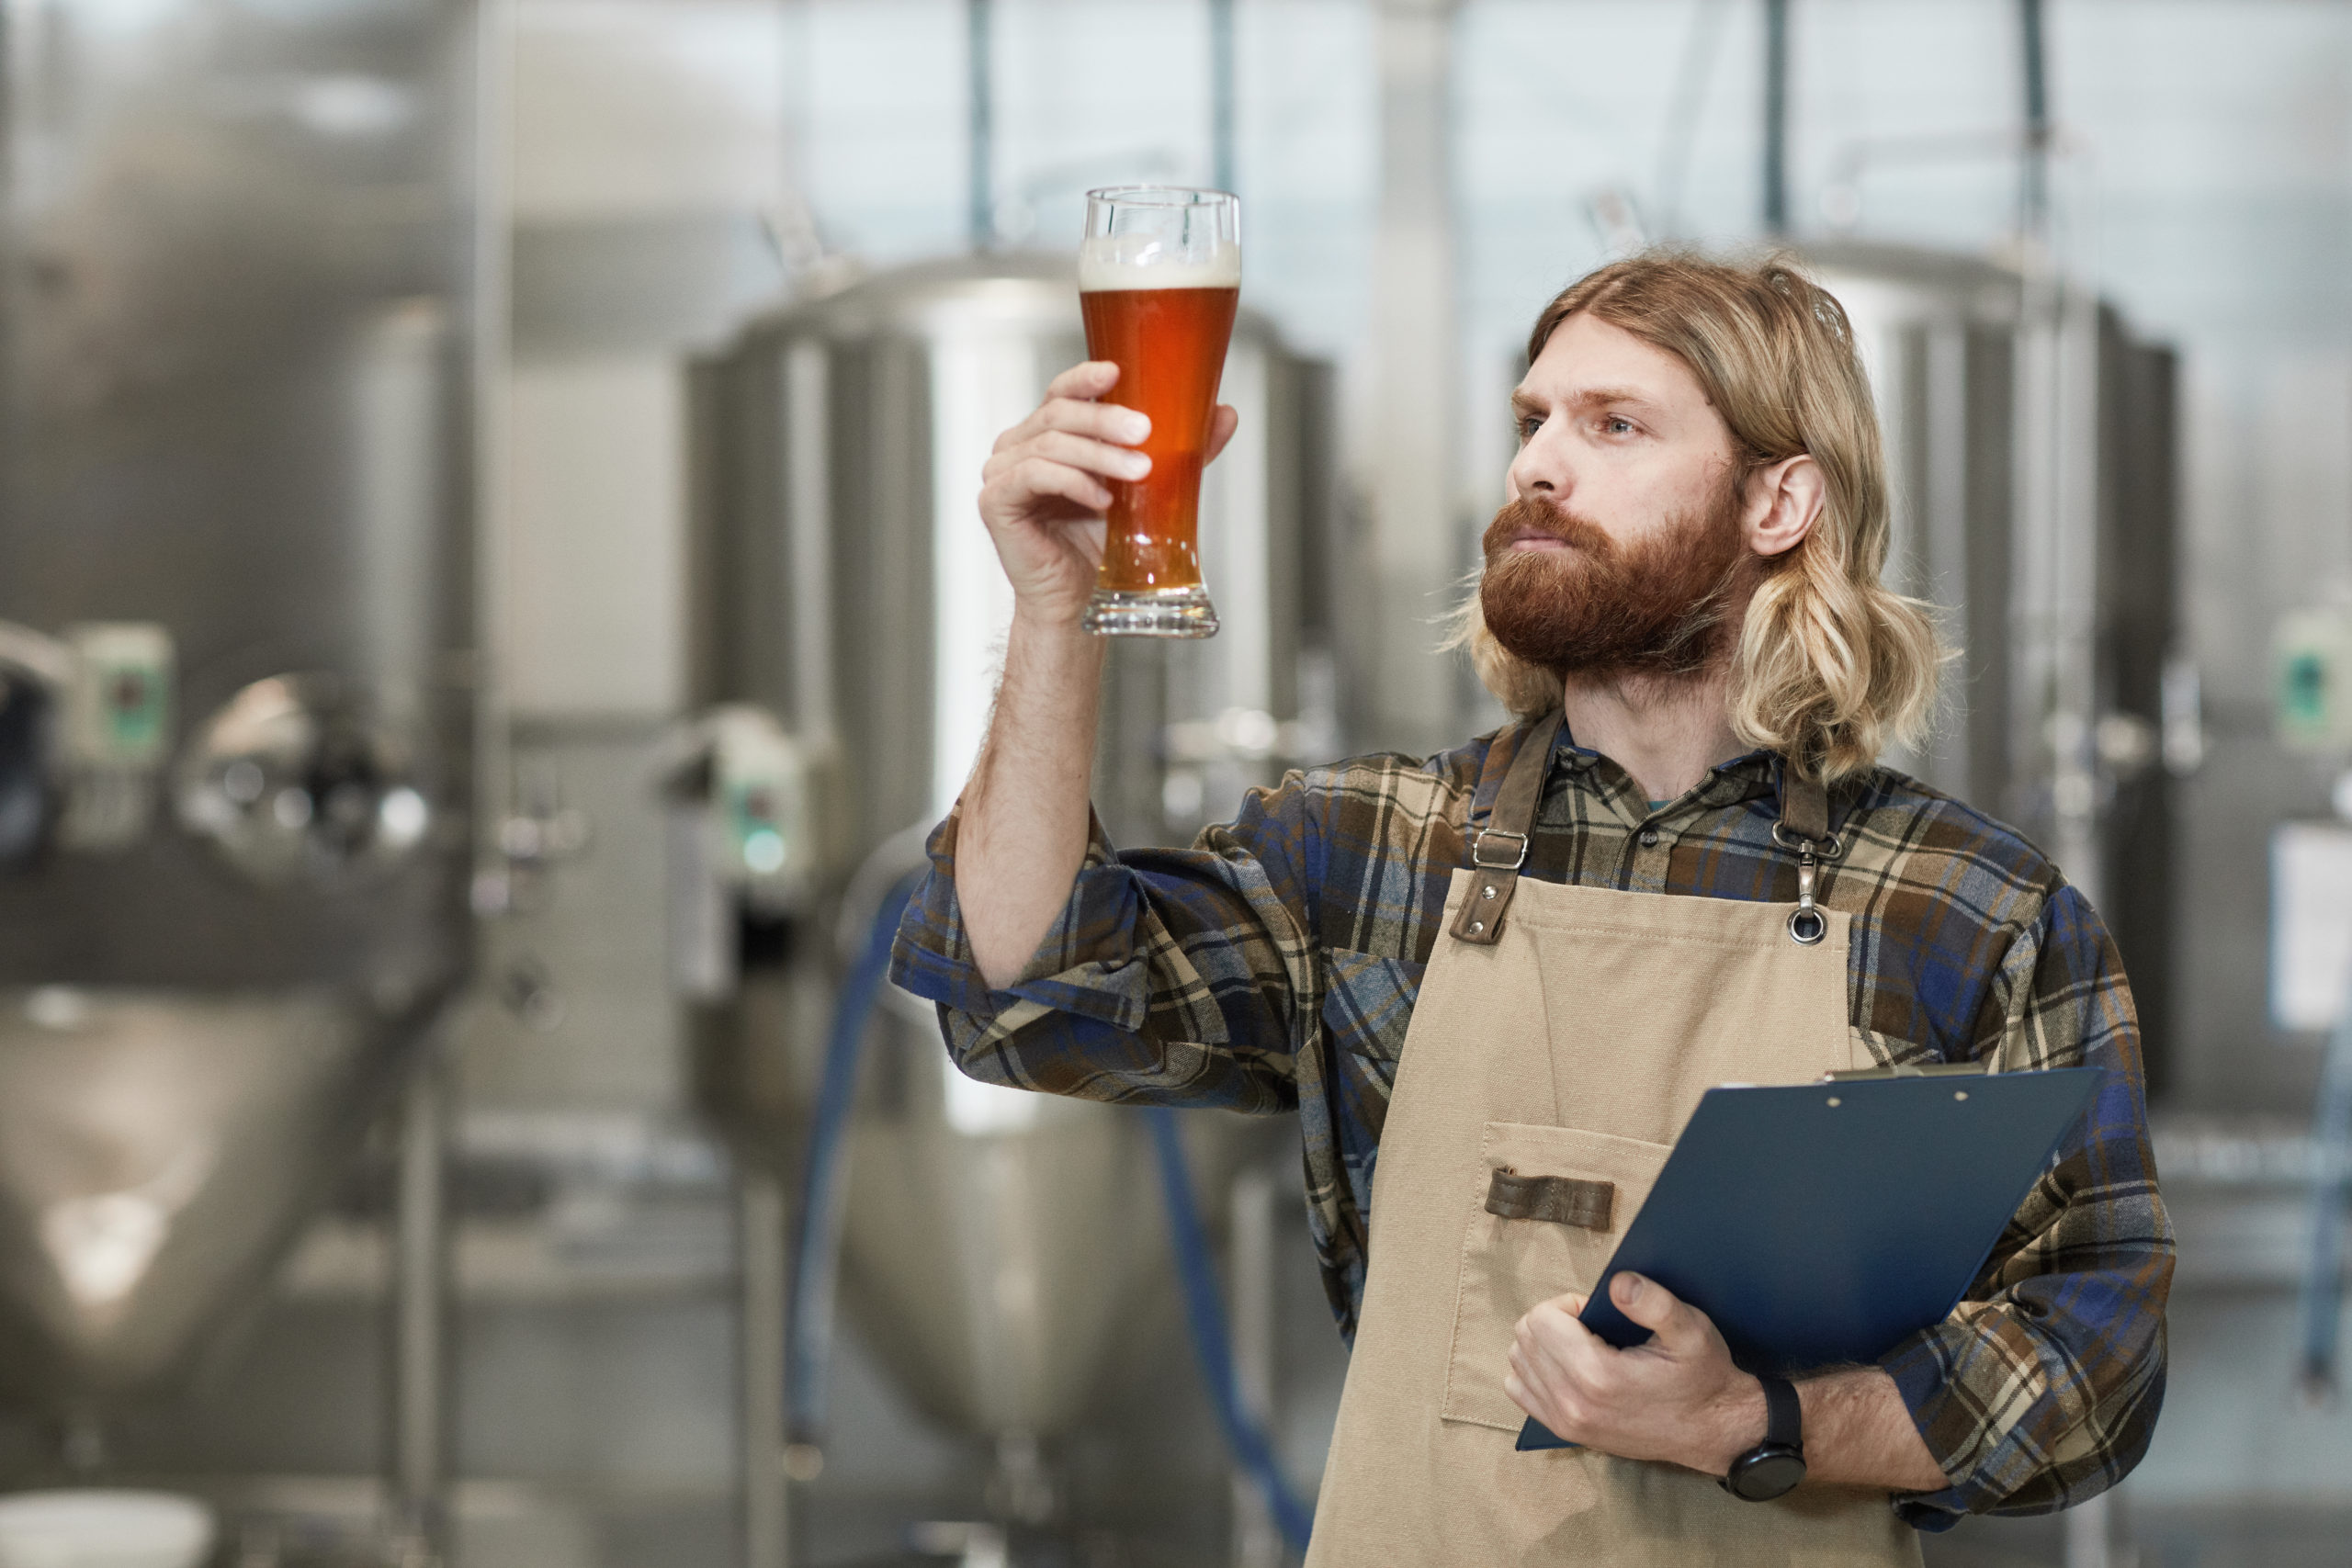 Quality Control in the Beverage Industry